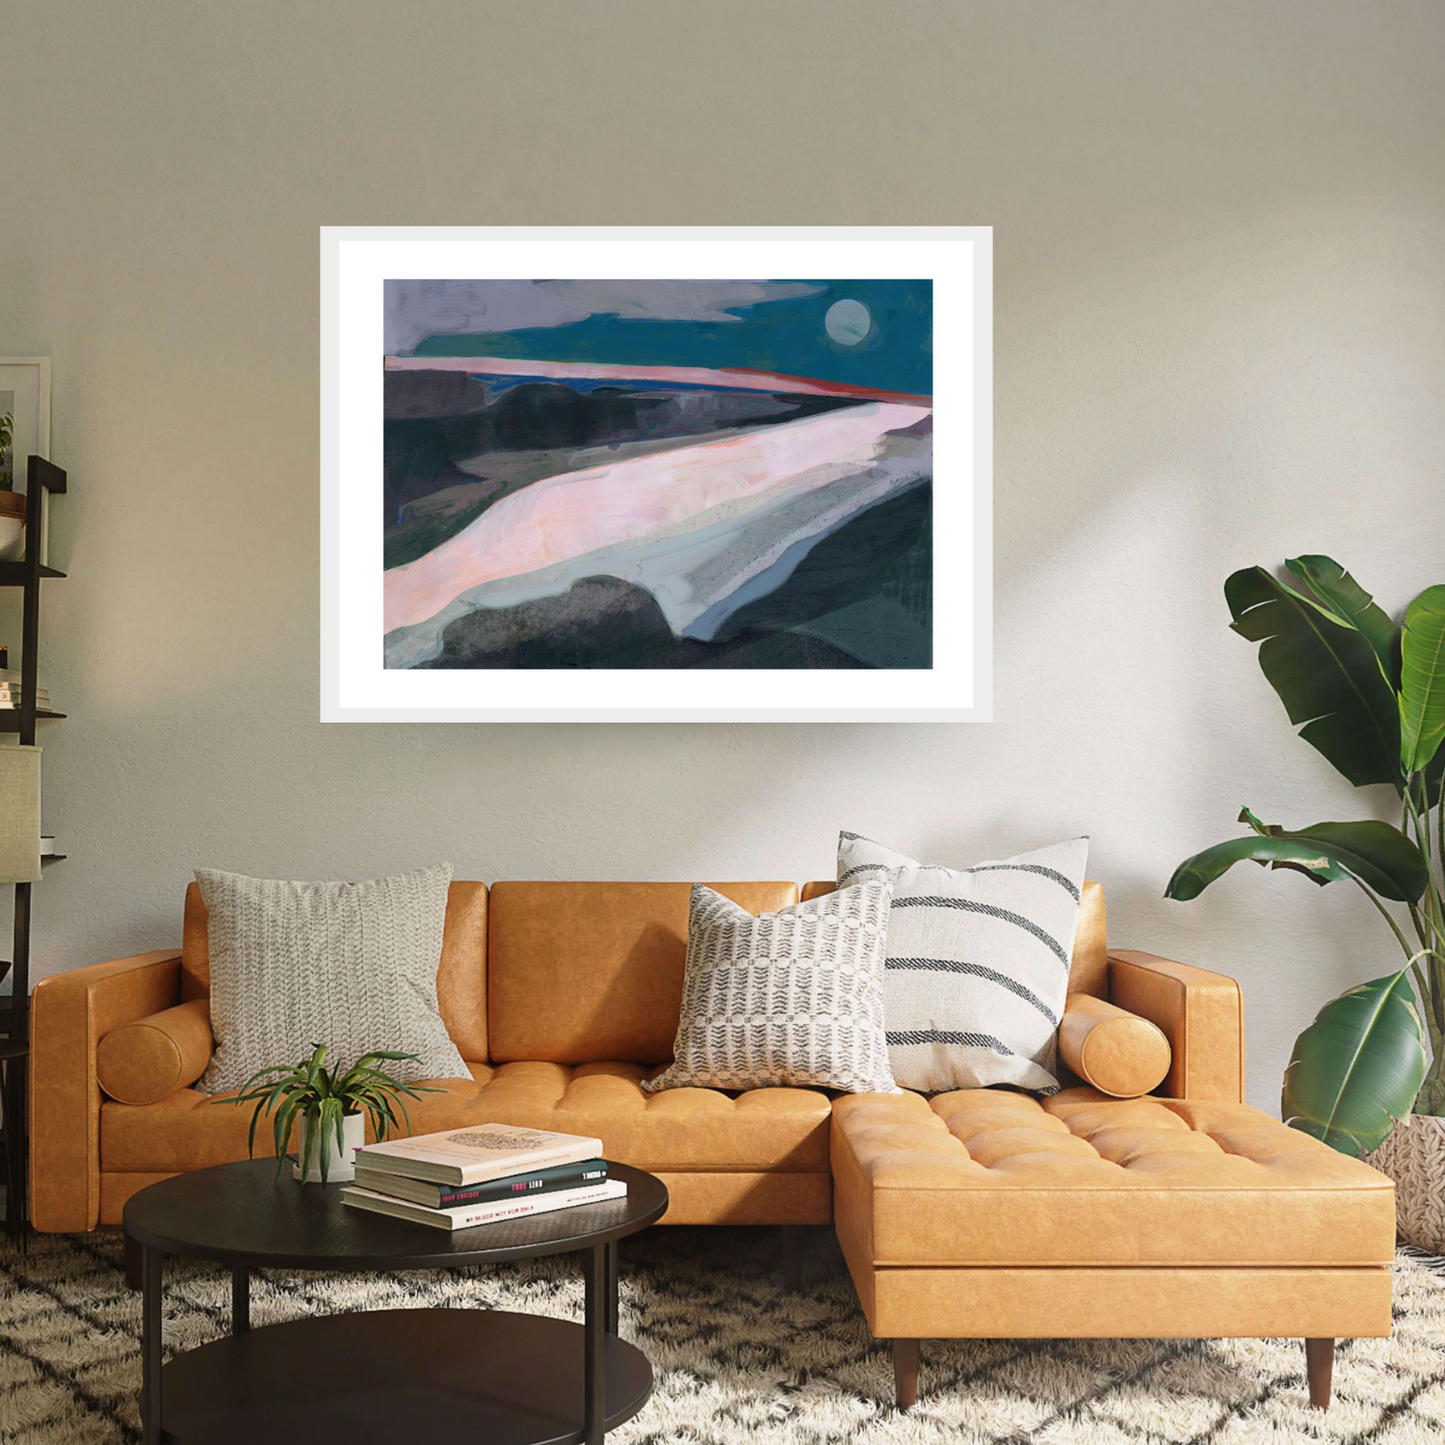 Dive into 'Broadstairs' by David McConochie: an abstract minimalist rural landscape, available as a white framed print. Tones of grey, teal, and pink paint a coastal scene, illuminated by a cool full moon. Let this serene artwork transport you to tranquil shores